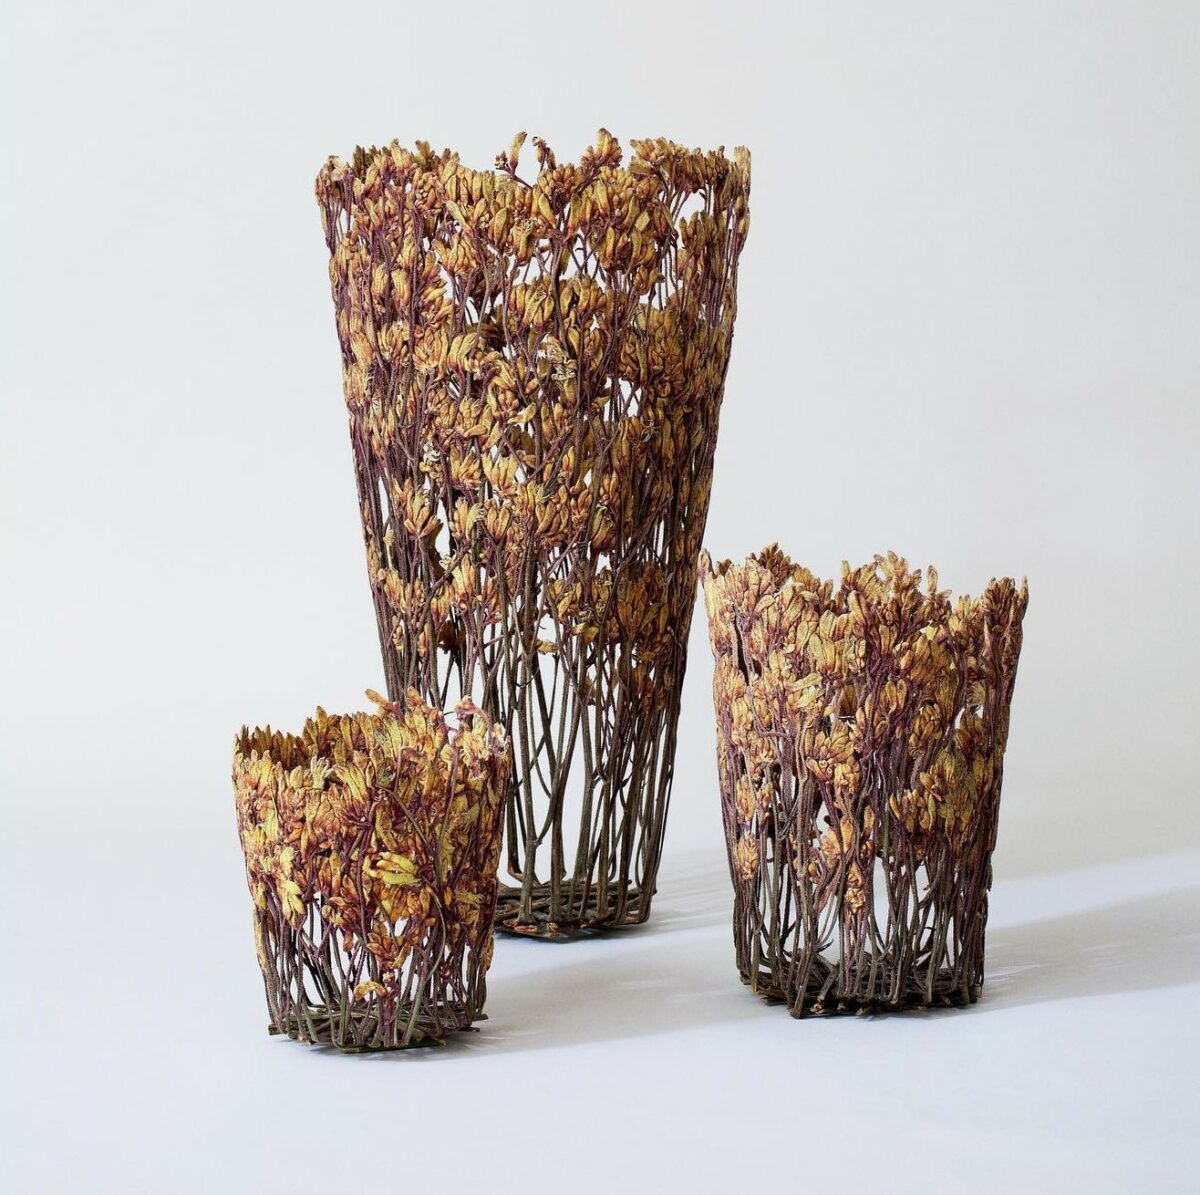 Bouquet Delicate Sculptural Vessels Made Of Dried And Pressed Flowers By Shannon Clegg (10)